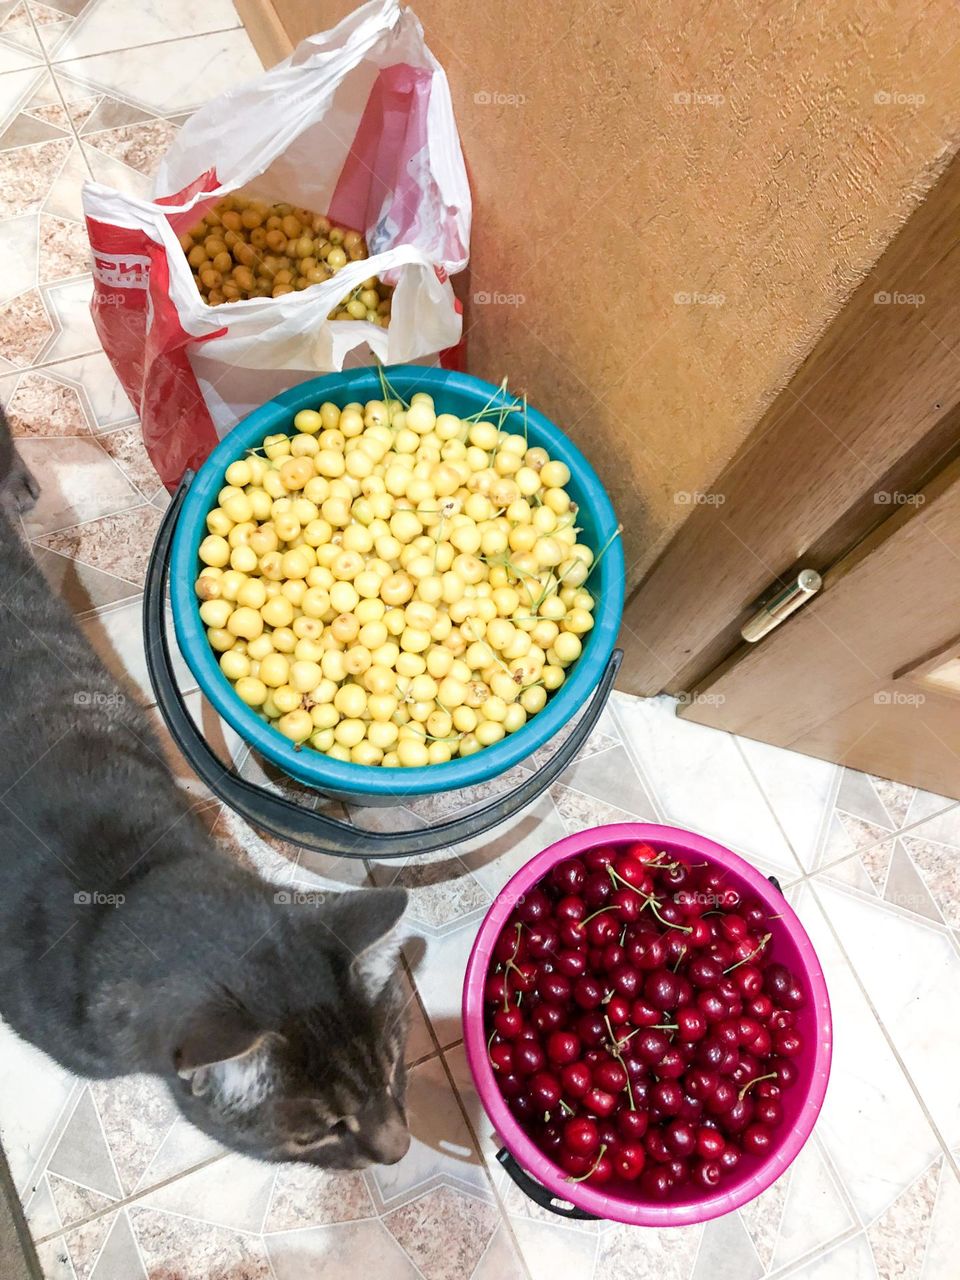 Bucket with yellow and red cherries and cat